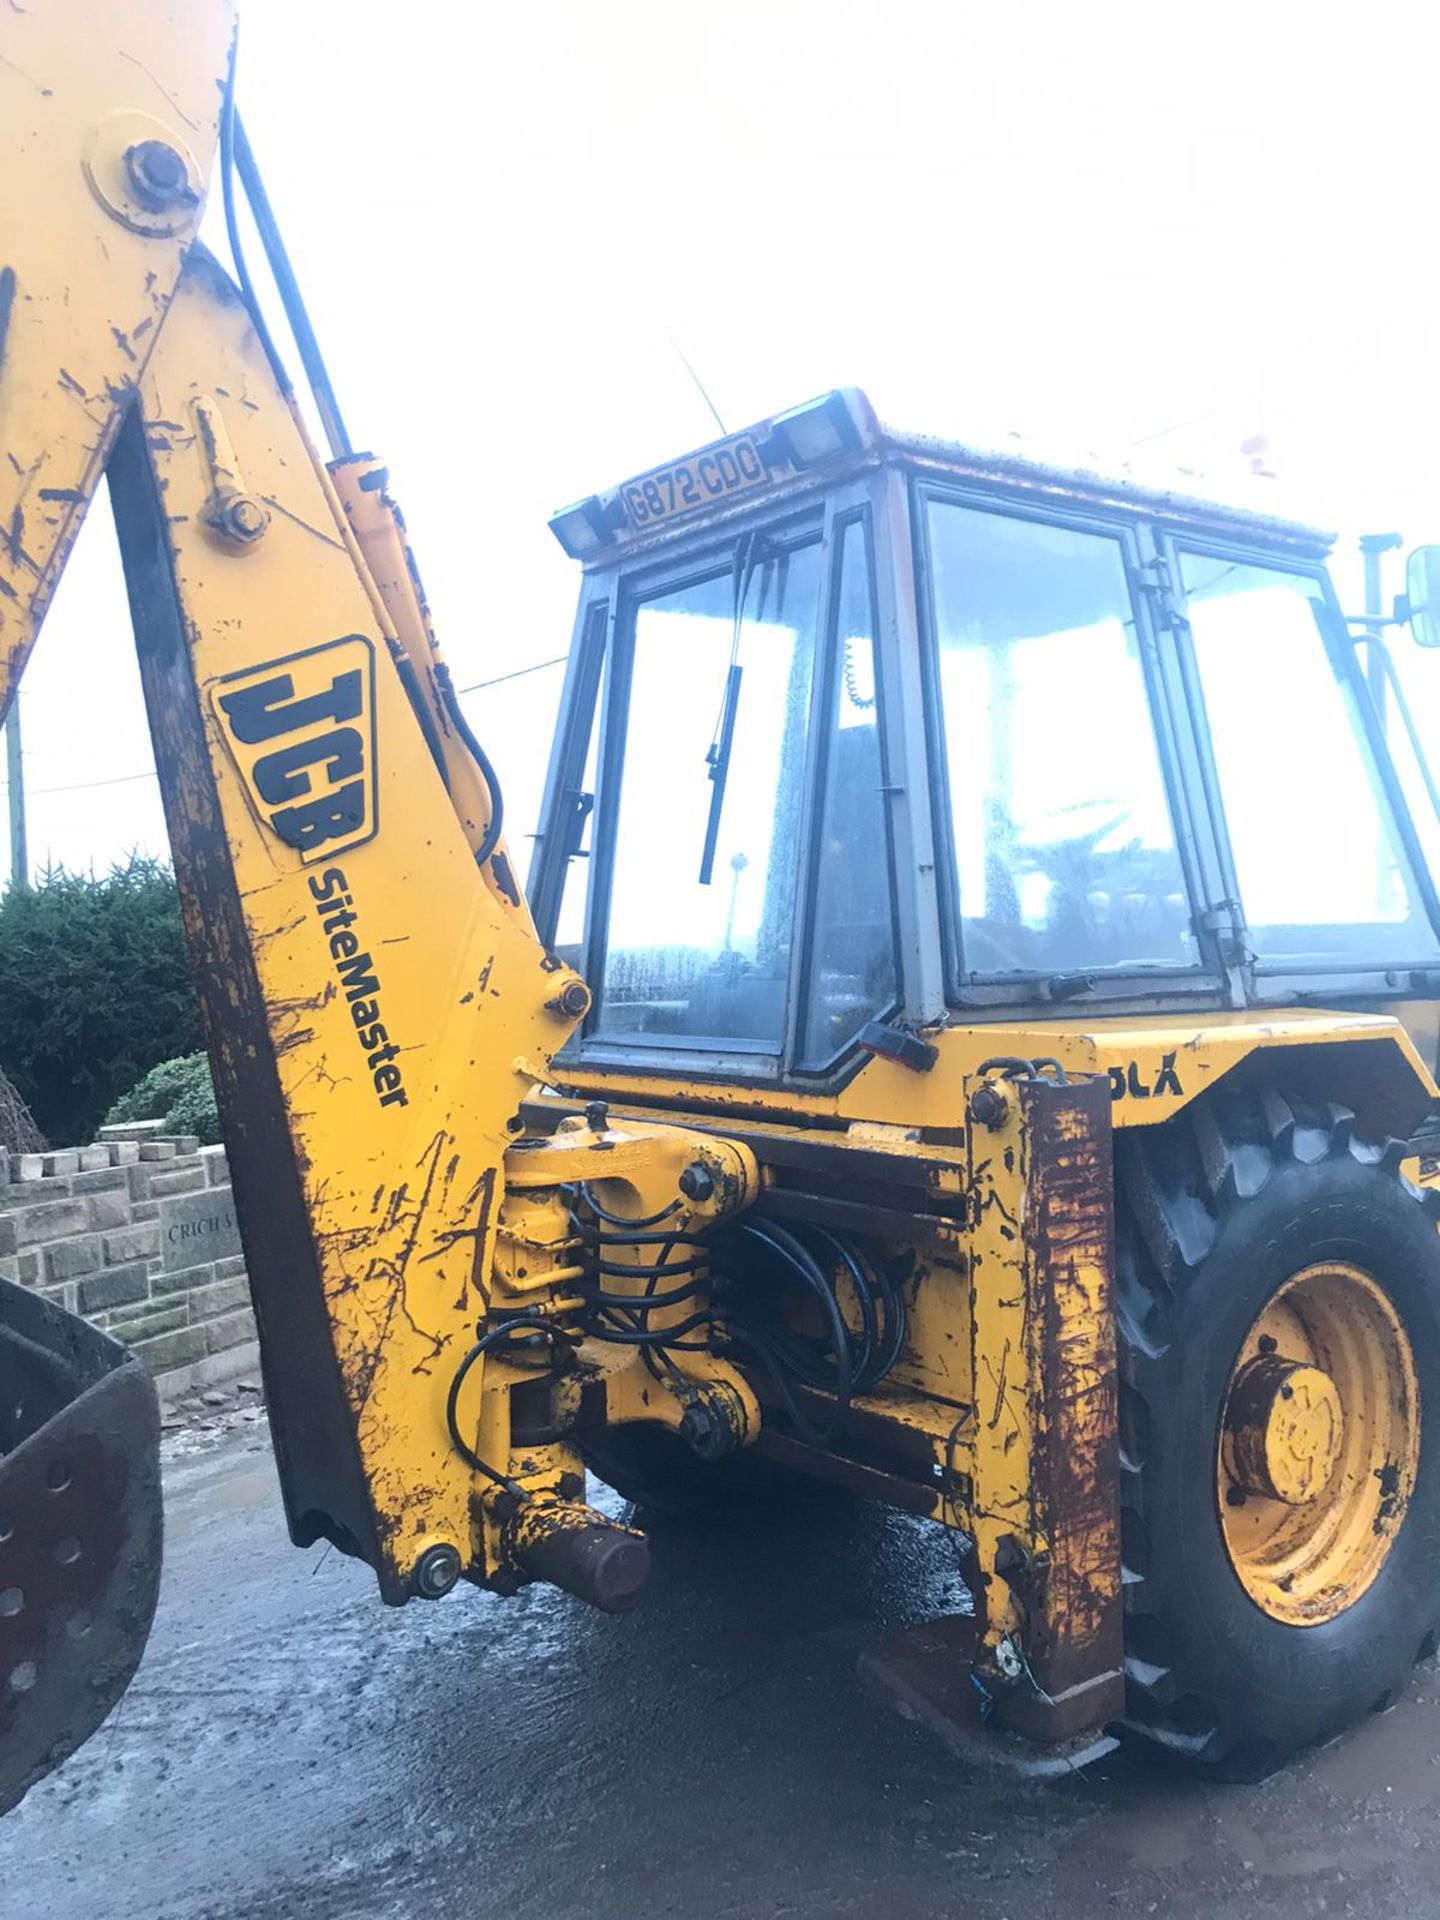 JCB 3CX SITEMASTER, 4 WHEEL DRIVE, EXTRA DIG, 4-IN-1 BUCKET, C/W 3 X BUCKETS, RUNS, WORKS & DIGS - Image 4 of 10